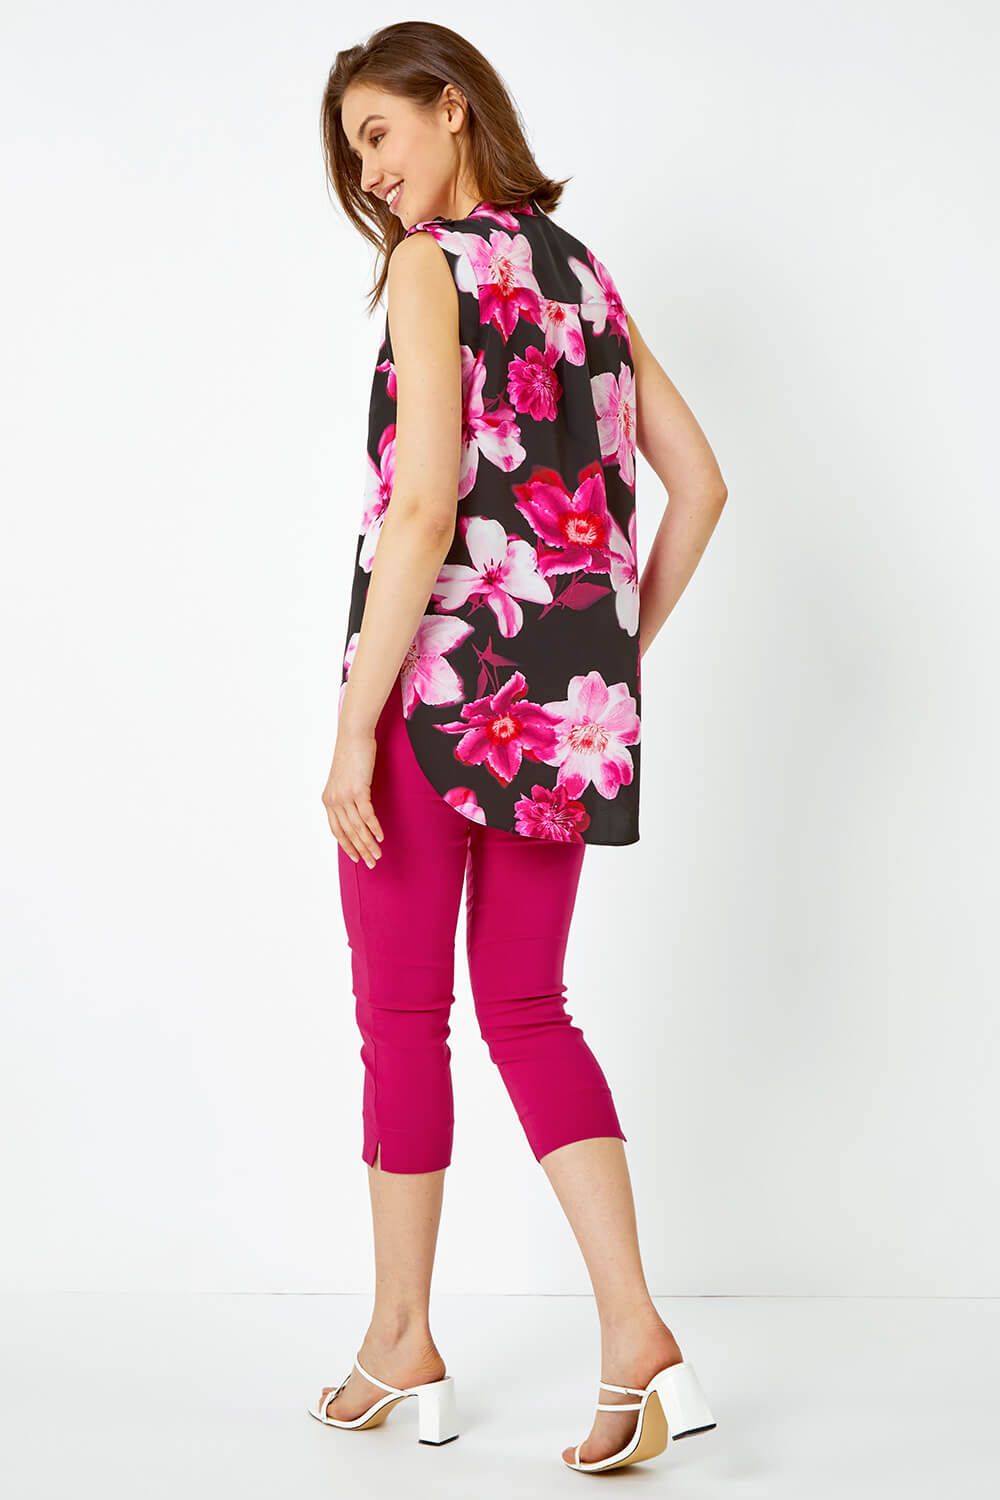 CERISE Sleeveless Floral Print Tunic Top, Image 3 of 5